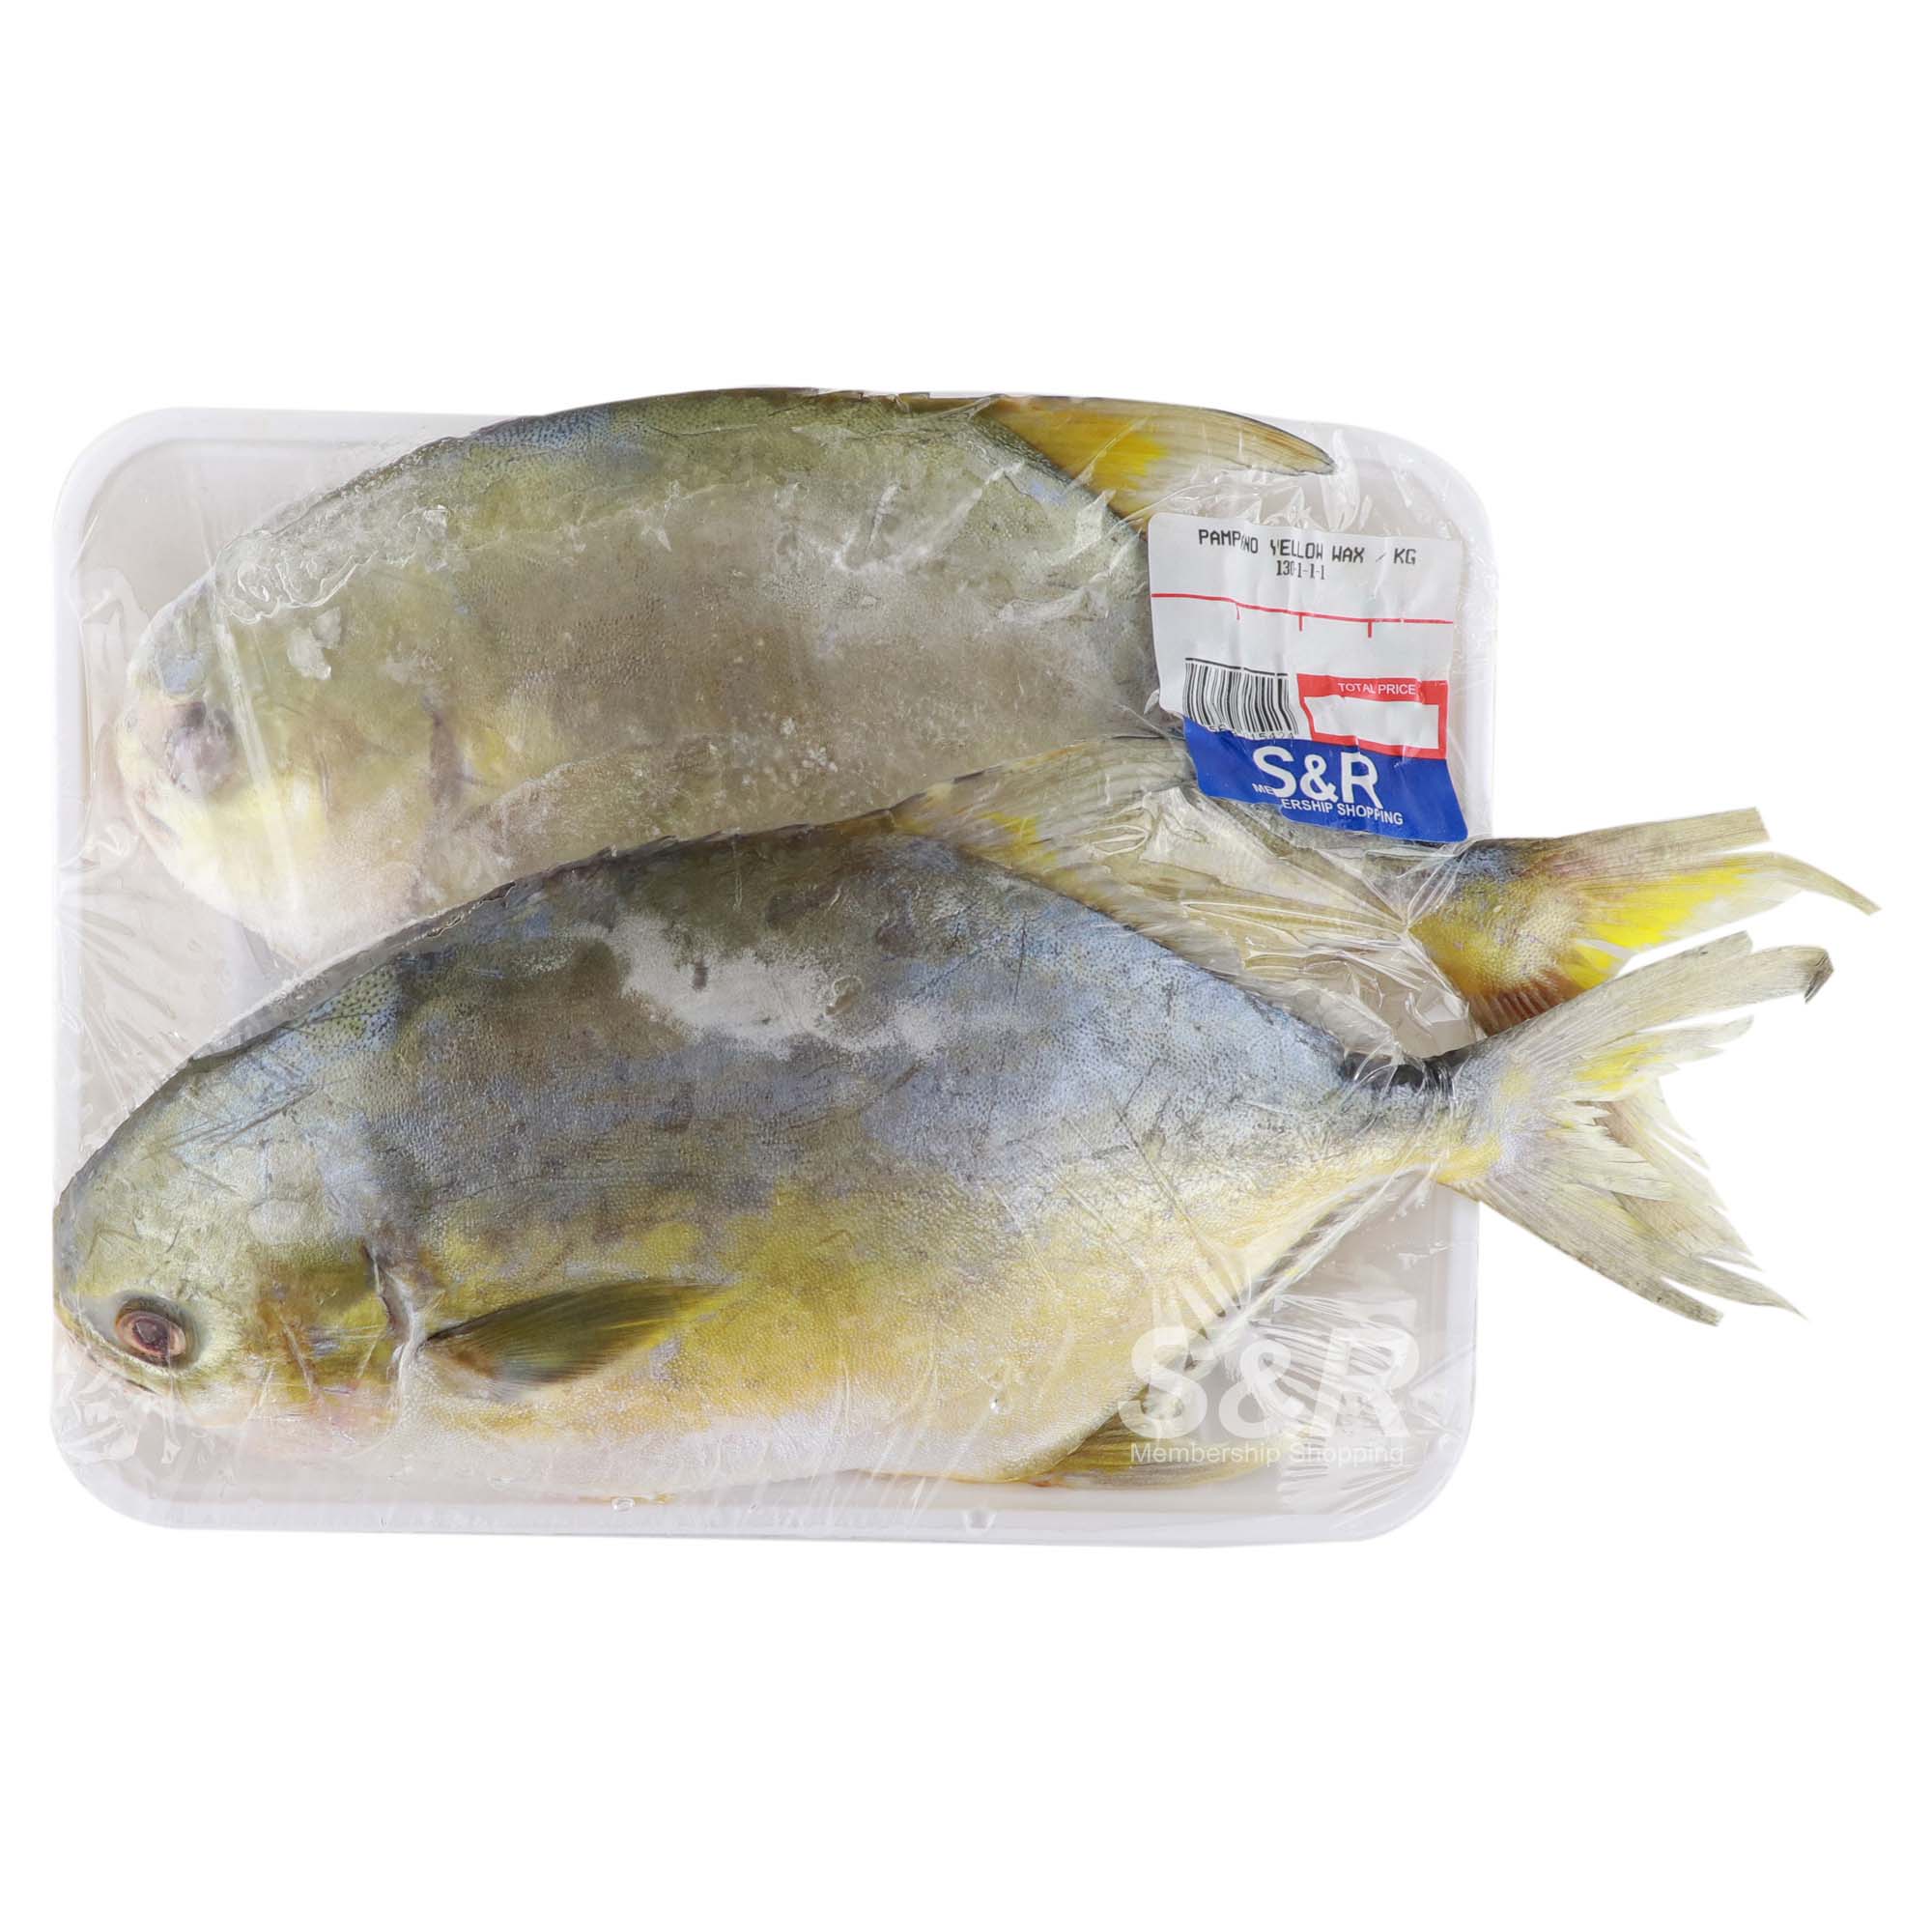 S&R Pampano Yellow Wax approx. 1.3kg